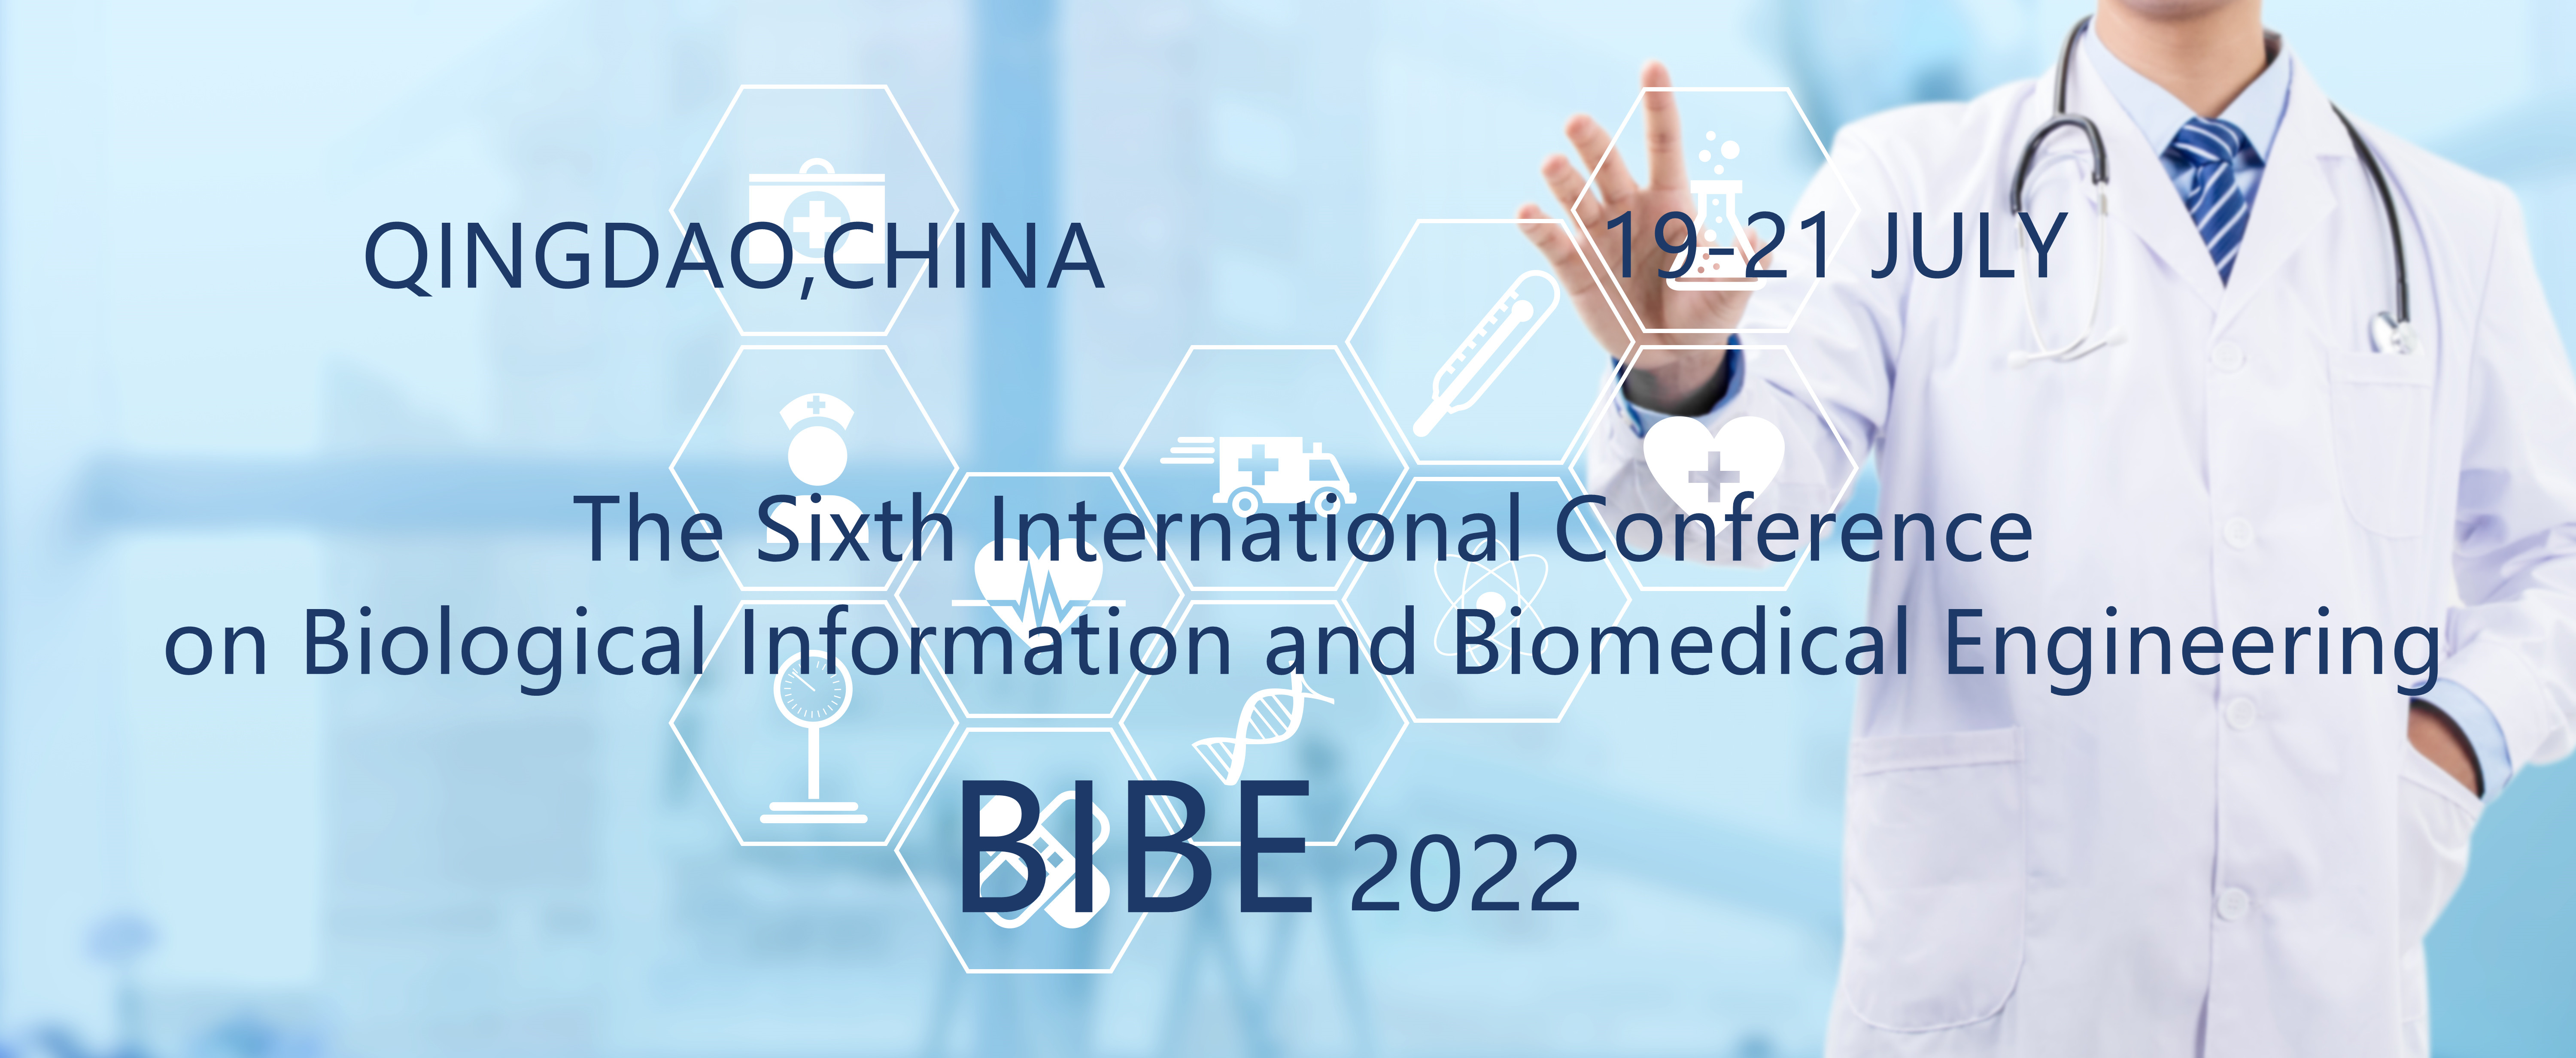 International Conference on Biological Information and Biomedical Engineering